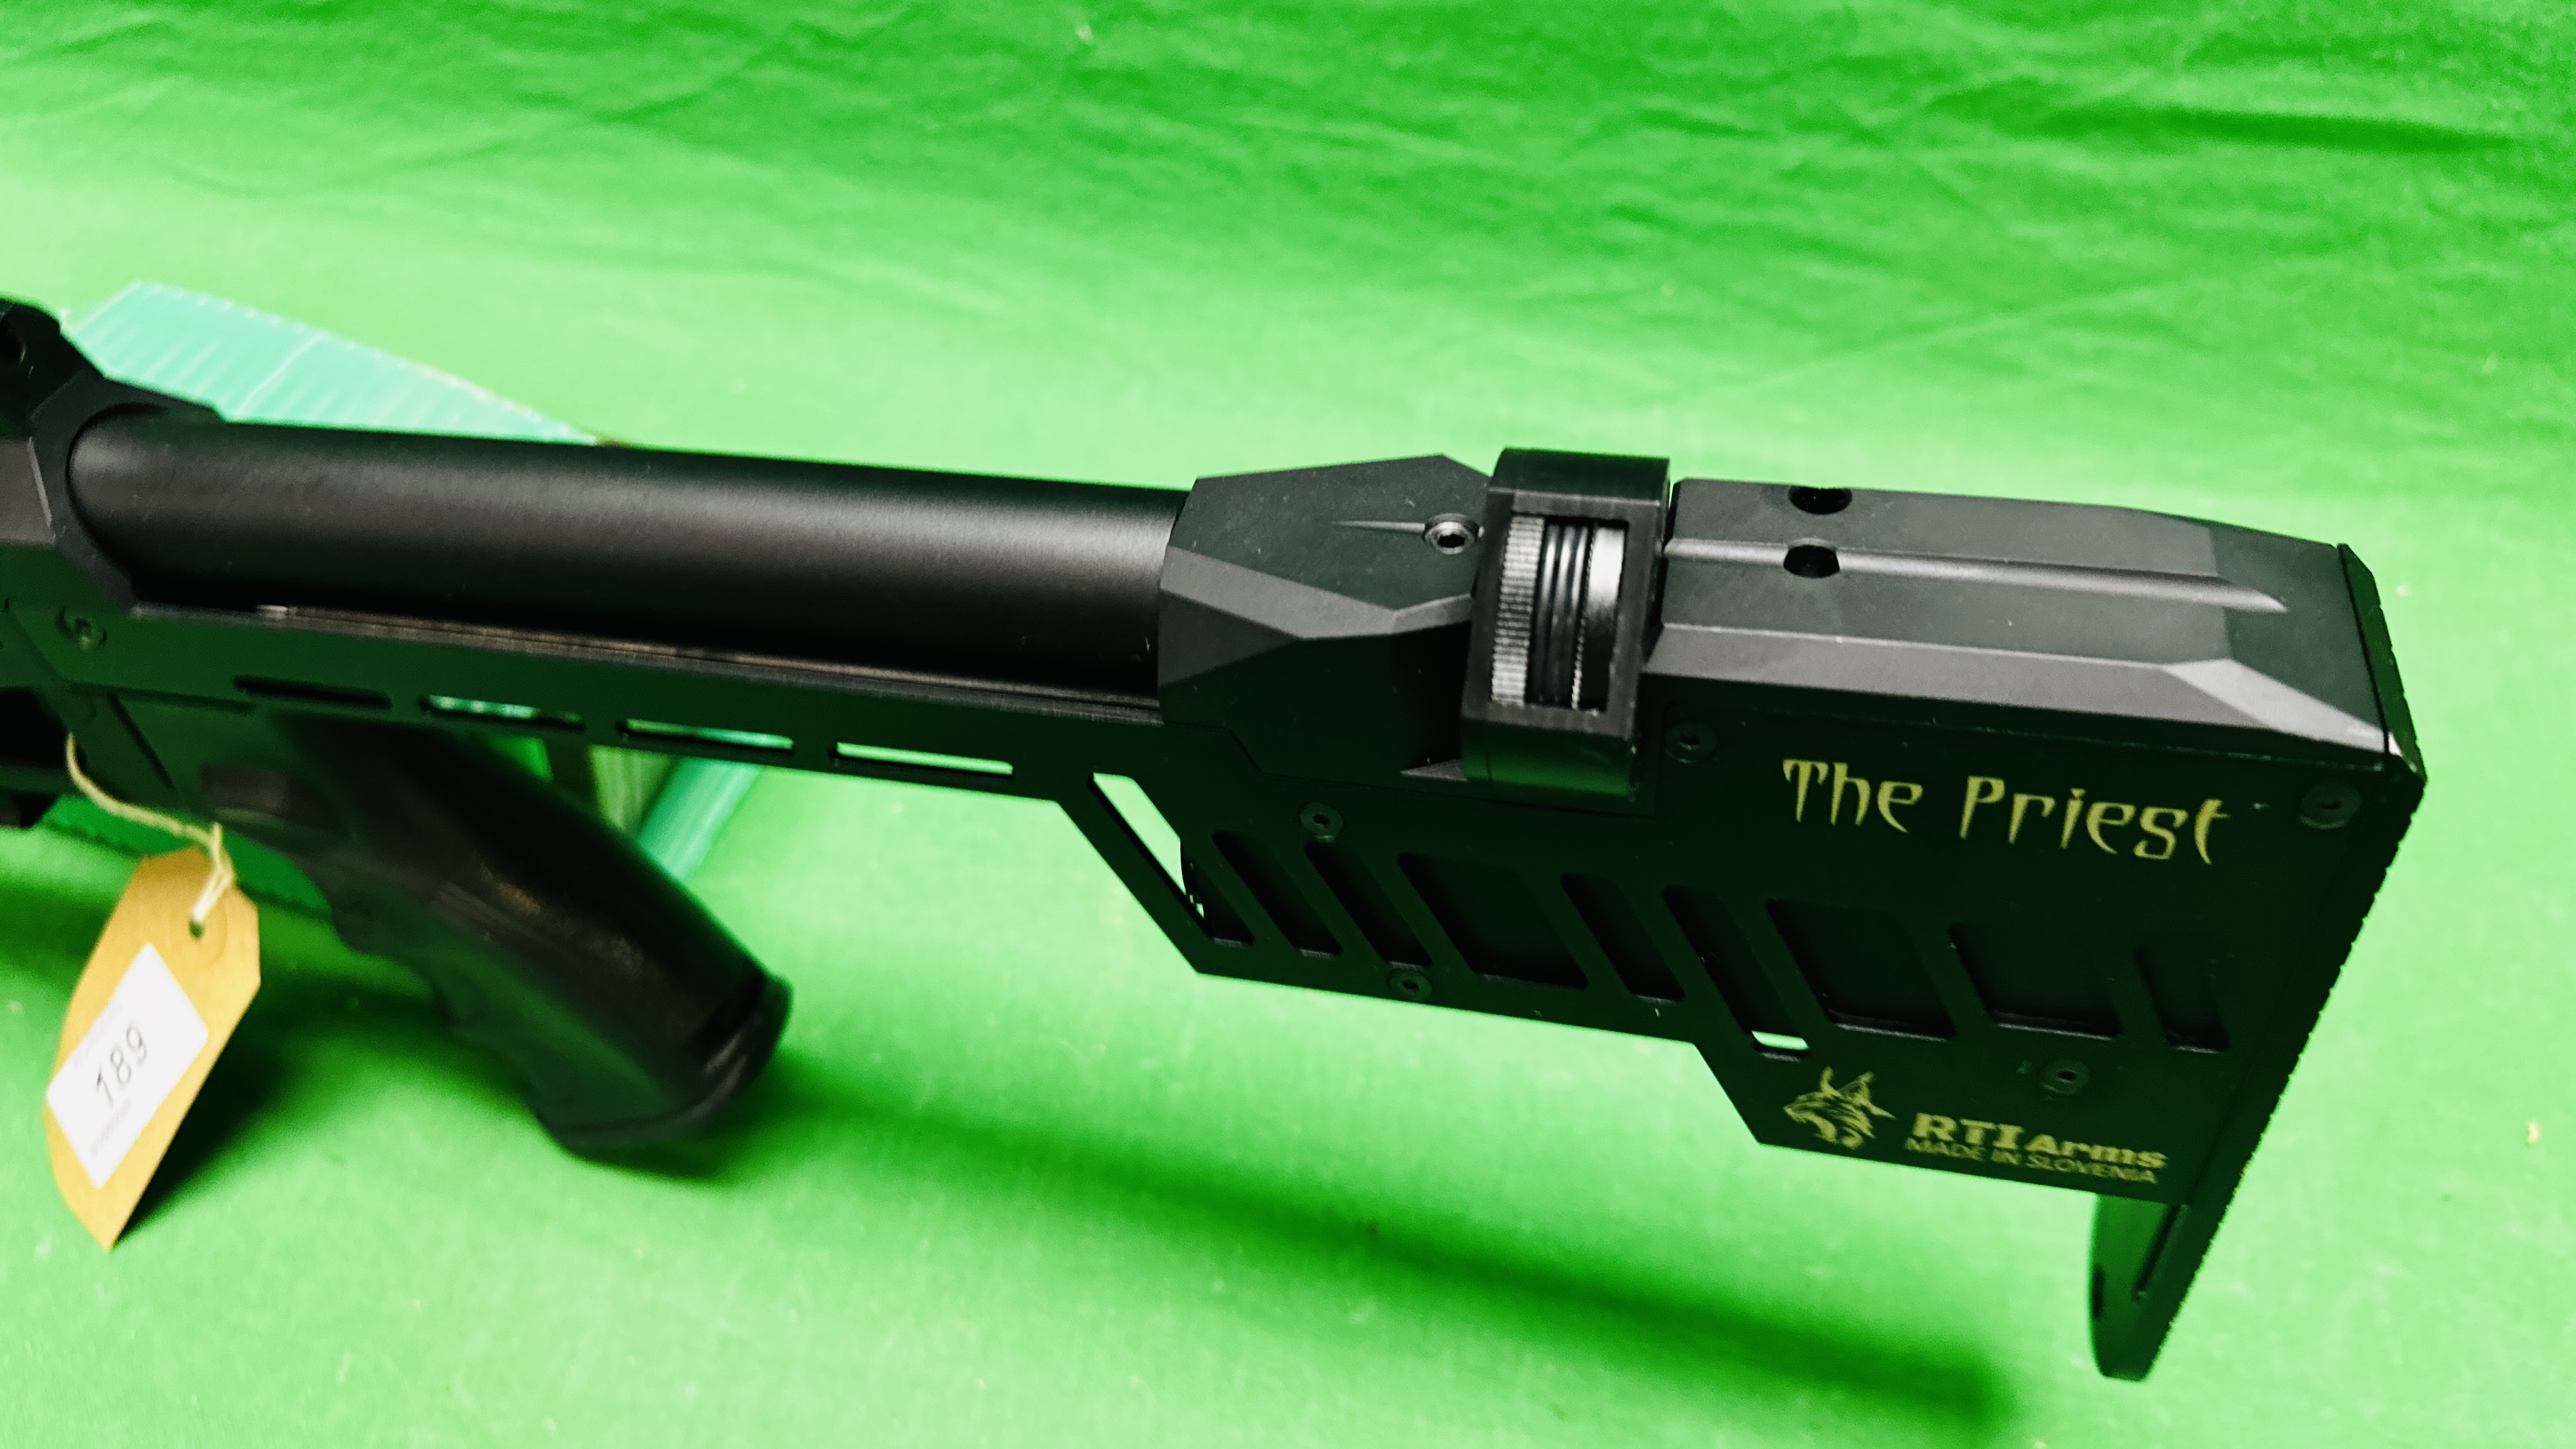 RTI ARMS "THE PRIEST" . - Image 6 of 14